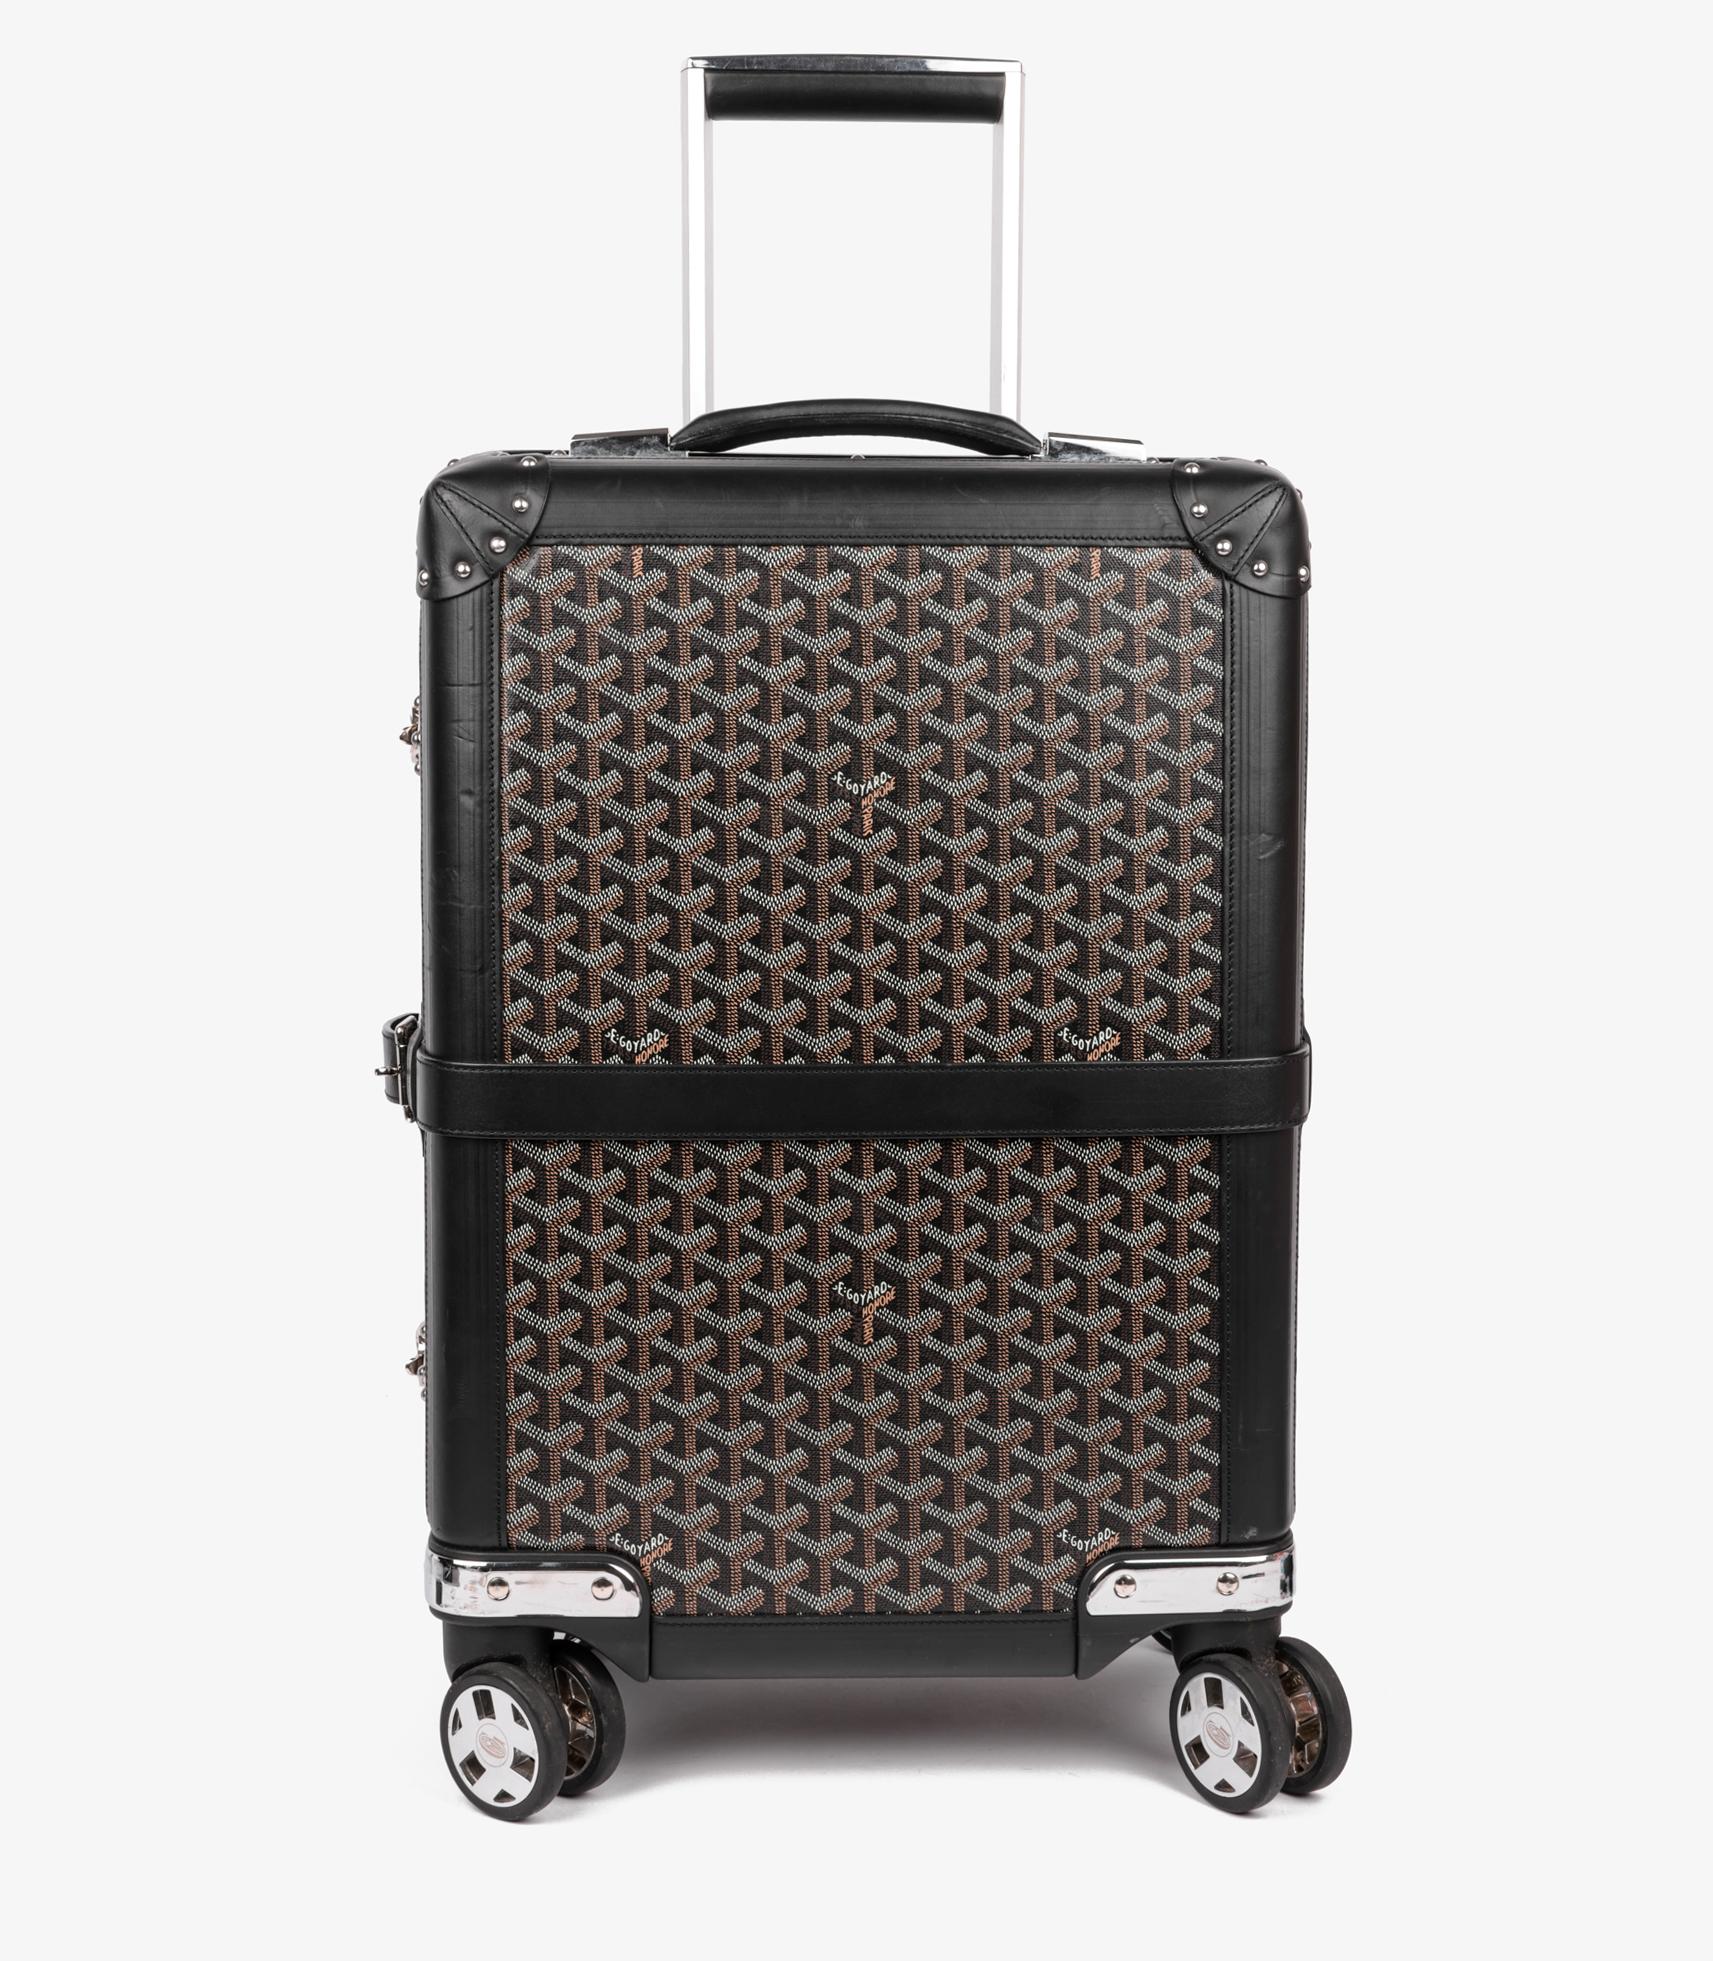 Goyard Black Chevron Coated Canvas & Calfskin Leather Bourget PM

Model- Bourget PM
Product Type- Travel
Serial Number- MAE020191
Accompanied By- Goyard Dust Bag, Padlock, Keys
Colour- Black
Hardware- Silver
Material(s)- Coated Canvas, Calfskin